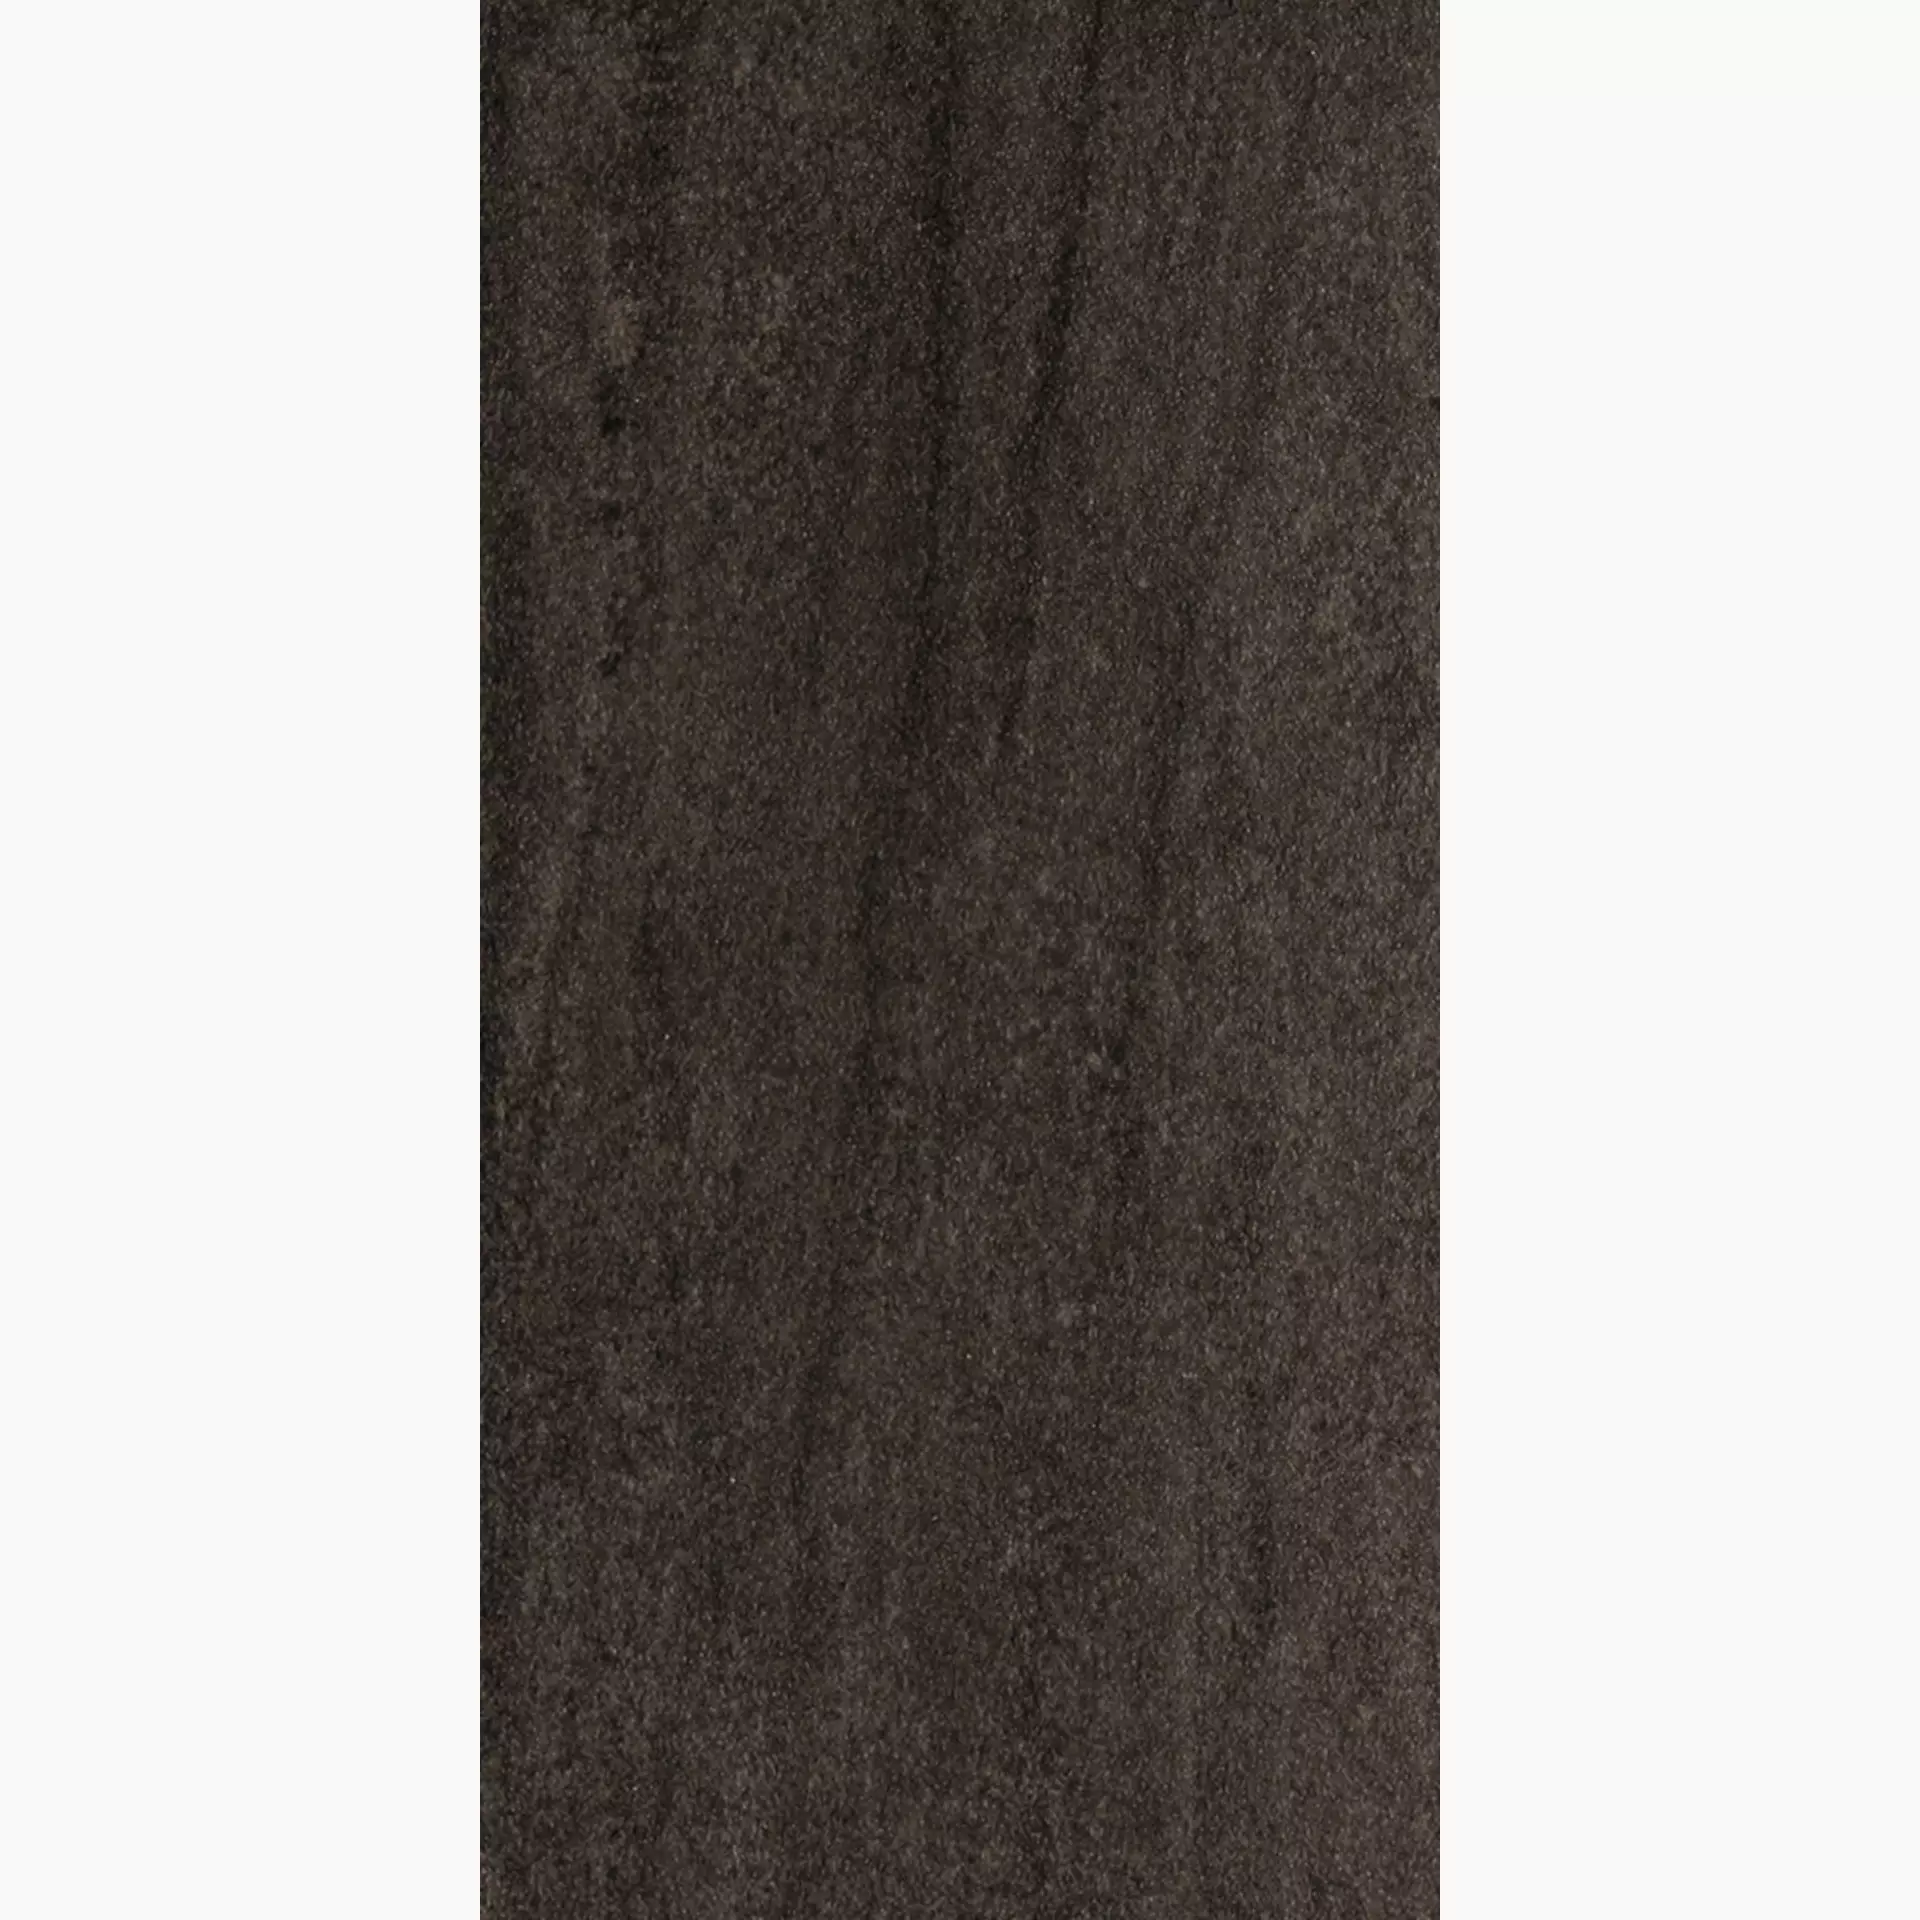 Rondine Contract Anthracite Naturale J83700 30,5x60,5cm 8,5mm